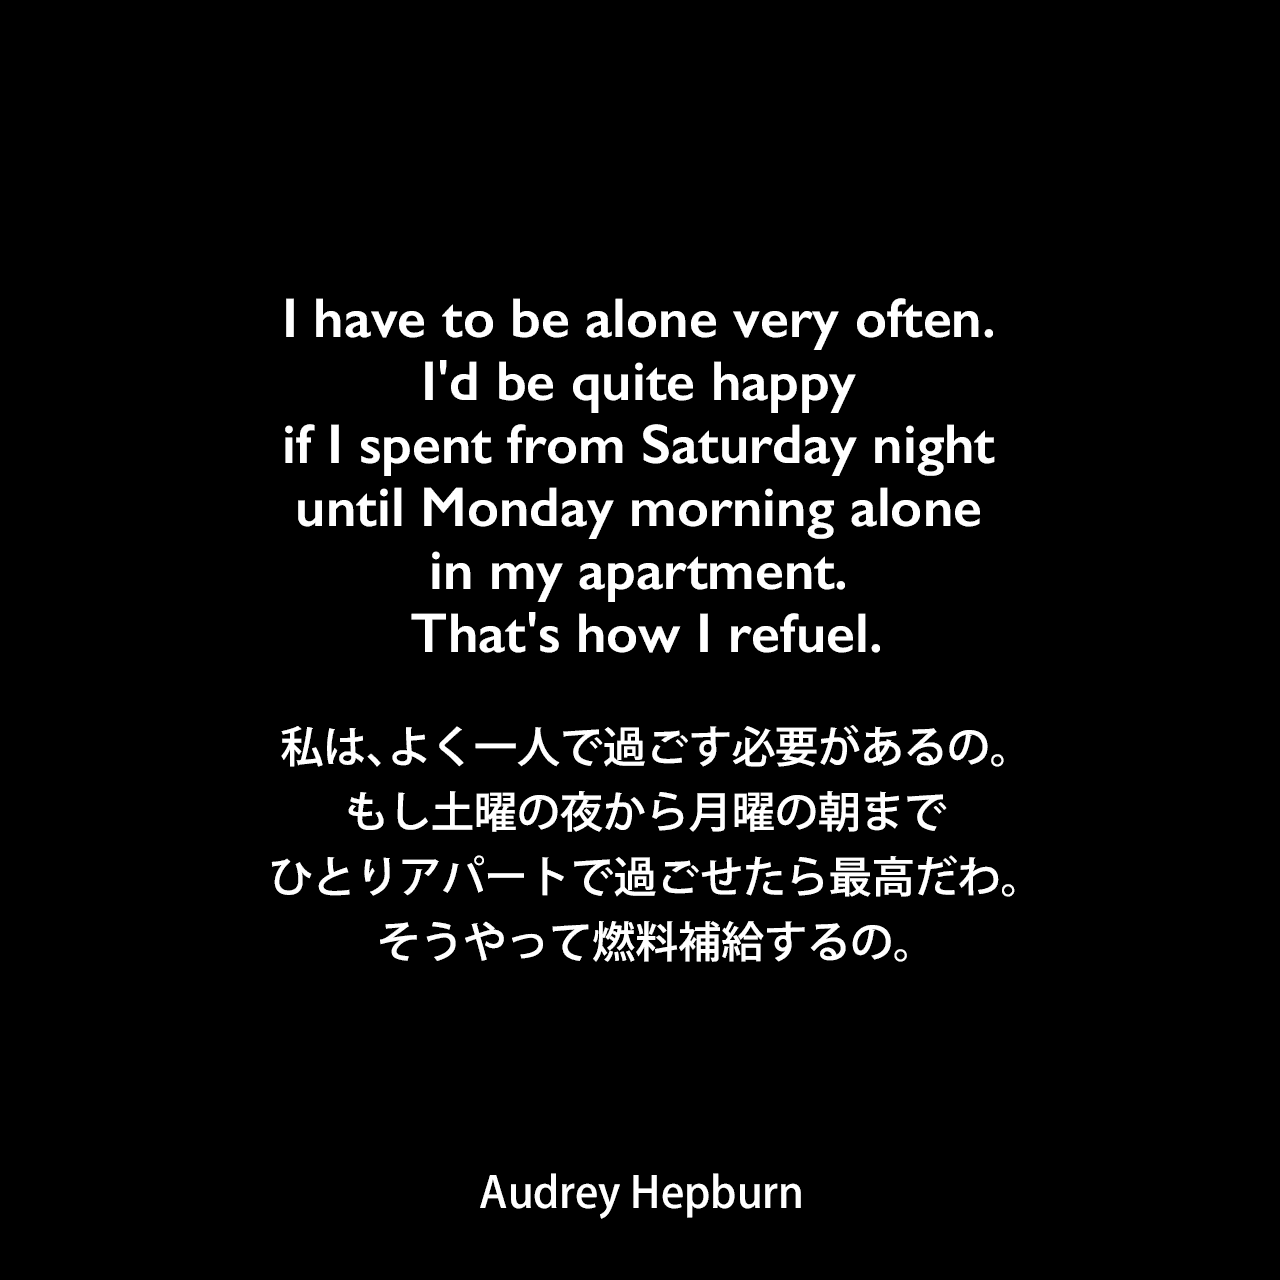 I have to be alone very often. I'd be quite happy if I spent from Saturday night until Monday morning alone in my apartment. That's how I refuel.私は、よく一人で過ごす必要があるの。もし土曜の夜から月曜の朝までひとりアパートで過ごせたら最高だわ。そうやって燃料補給するの。Audrey Hepburn